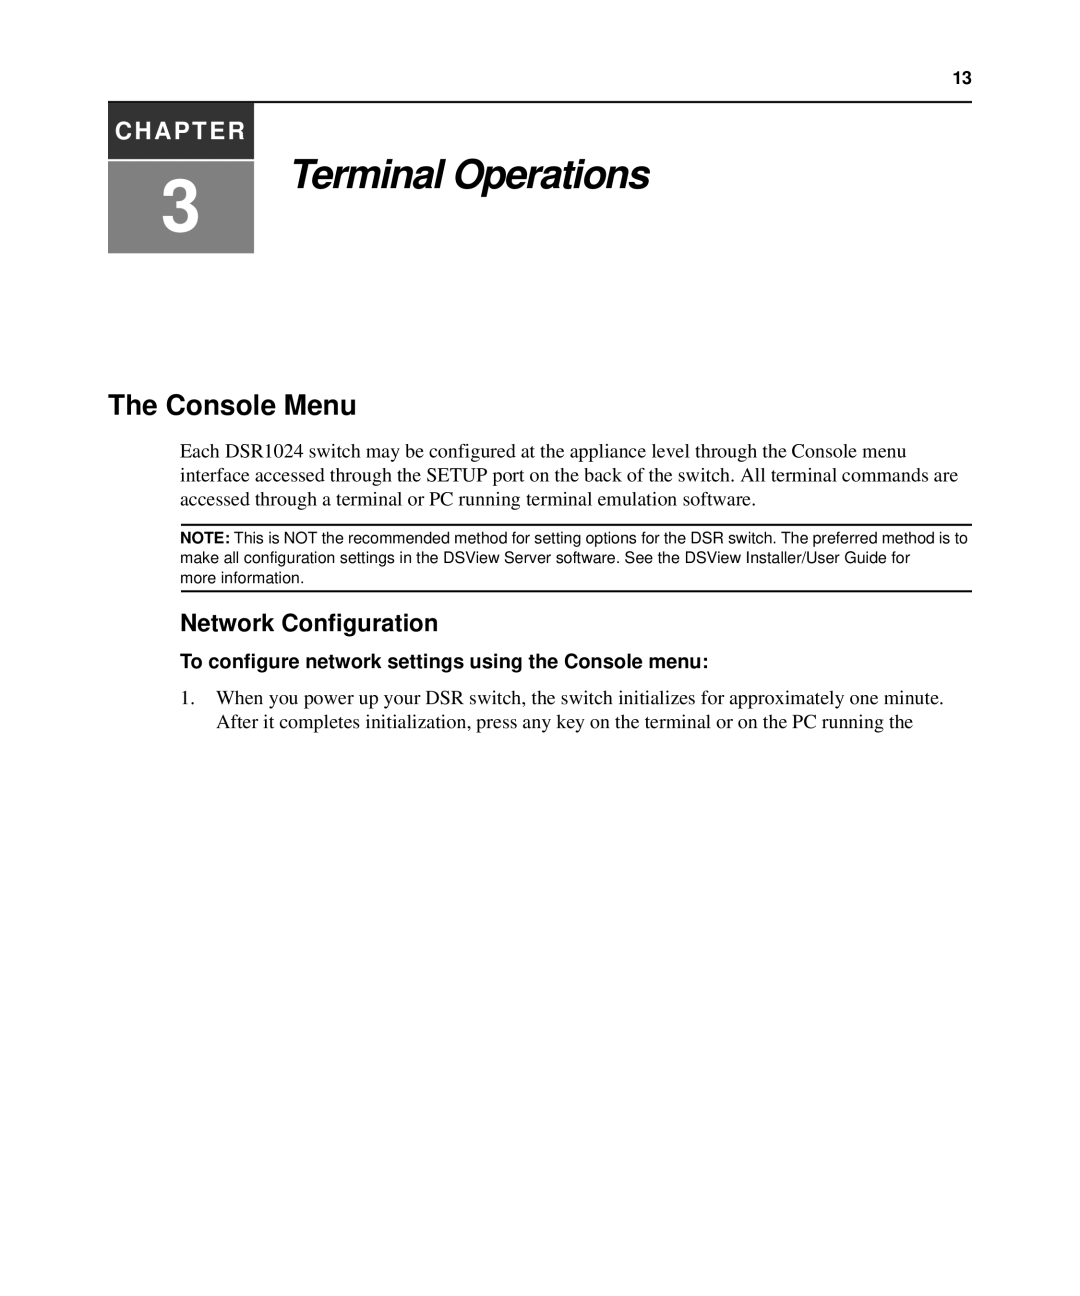 Avocent 1024 manual Console Menu, Network Configuration, To configure network settings using the Console menu 